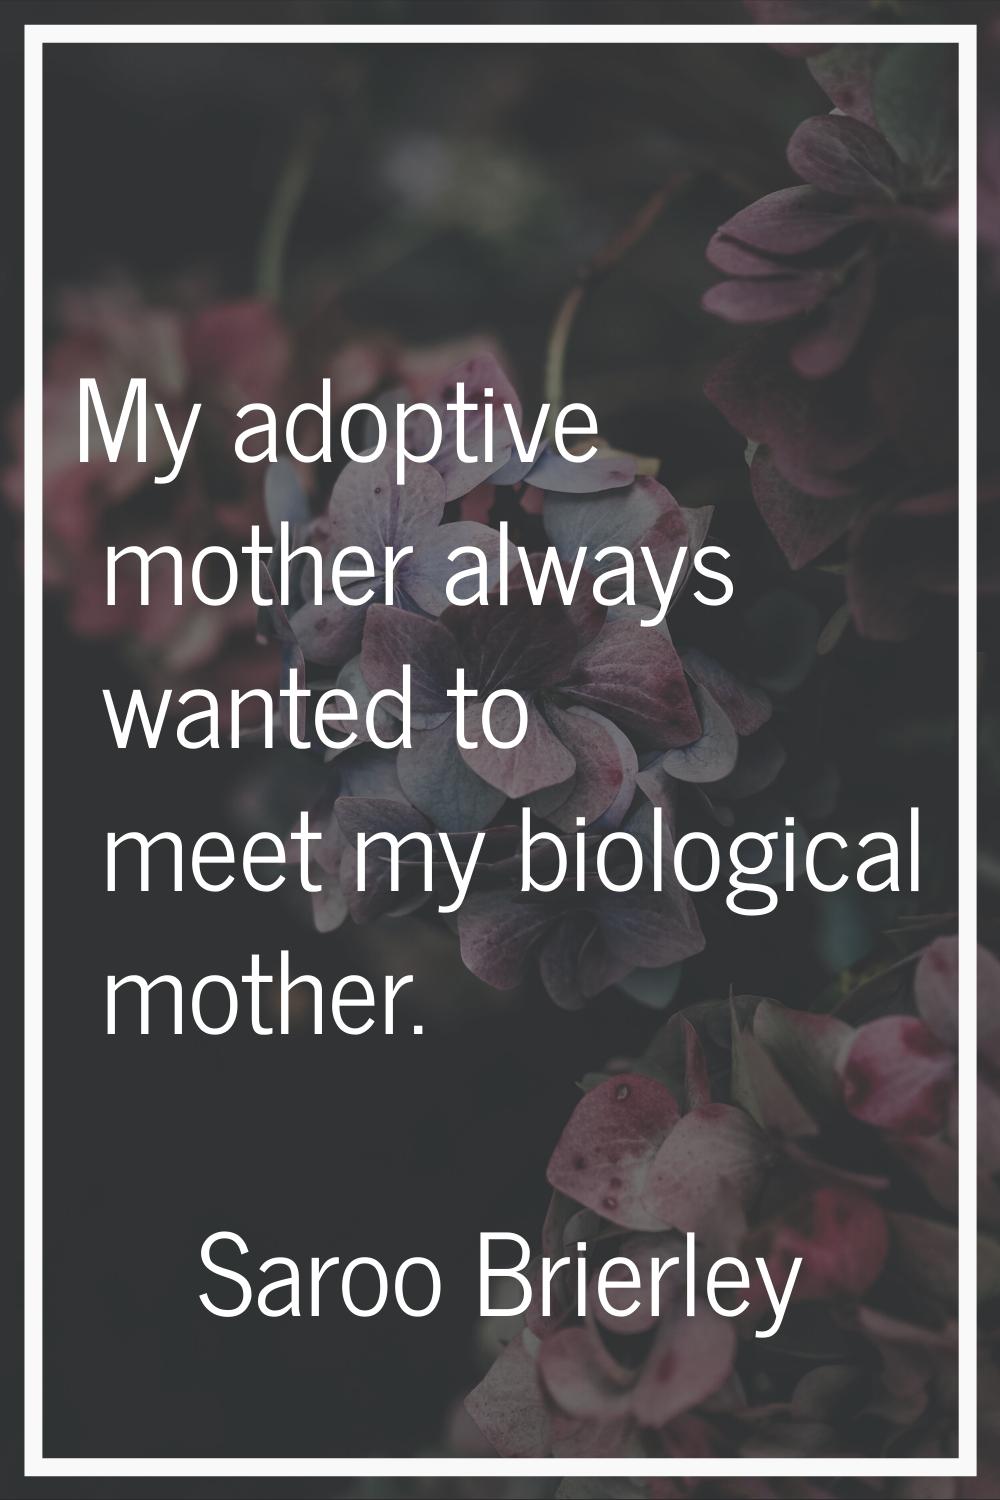 My adoptive mother always wanted to meet my biological mother.